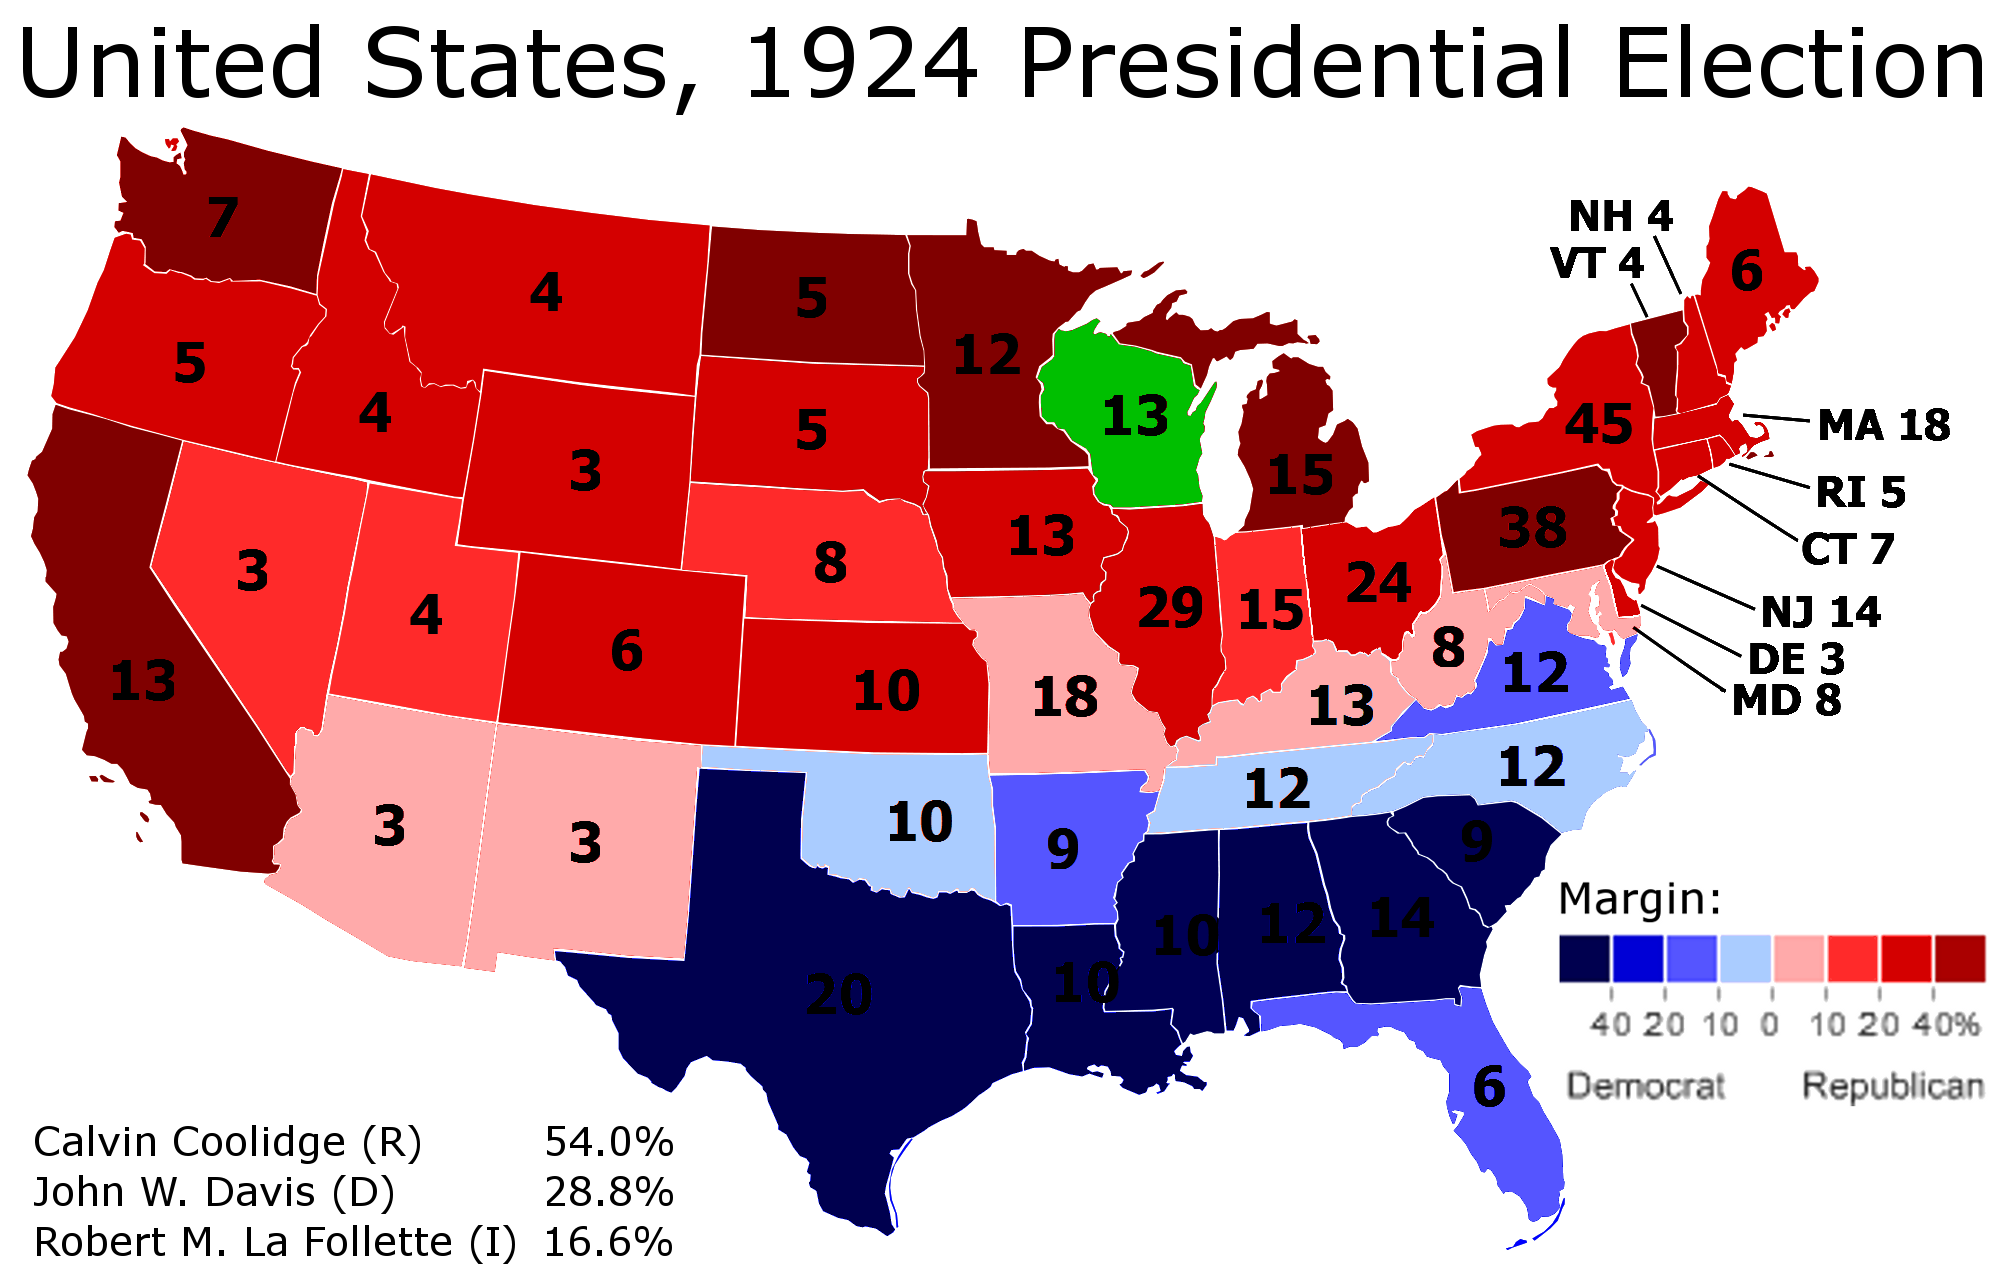 1924-presidential-election.png